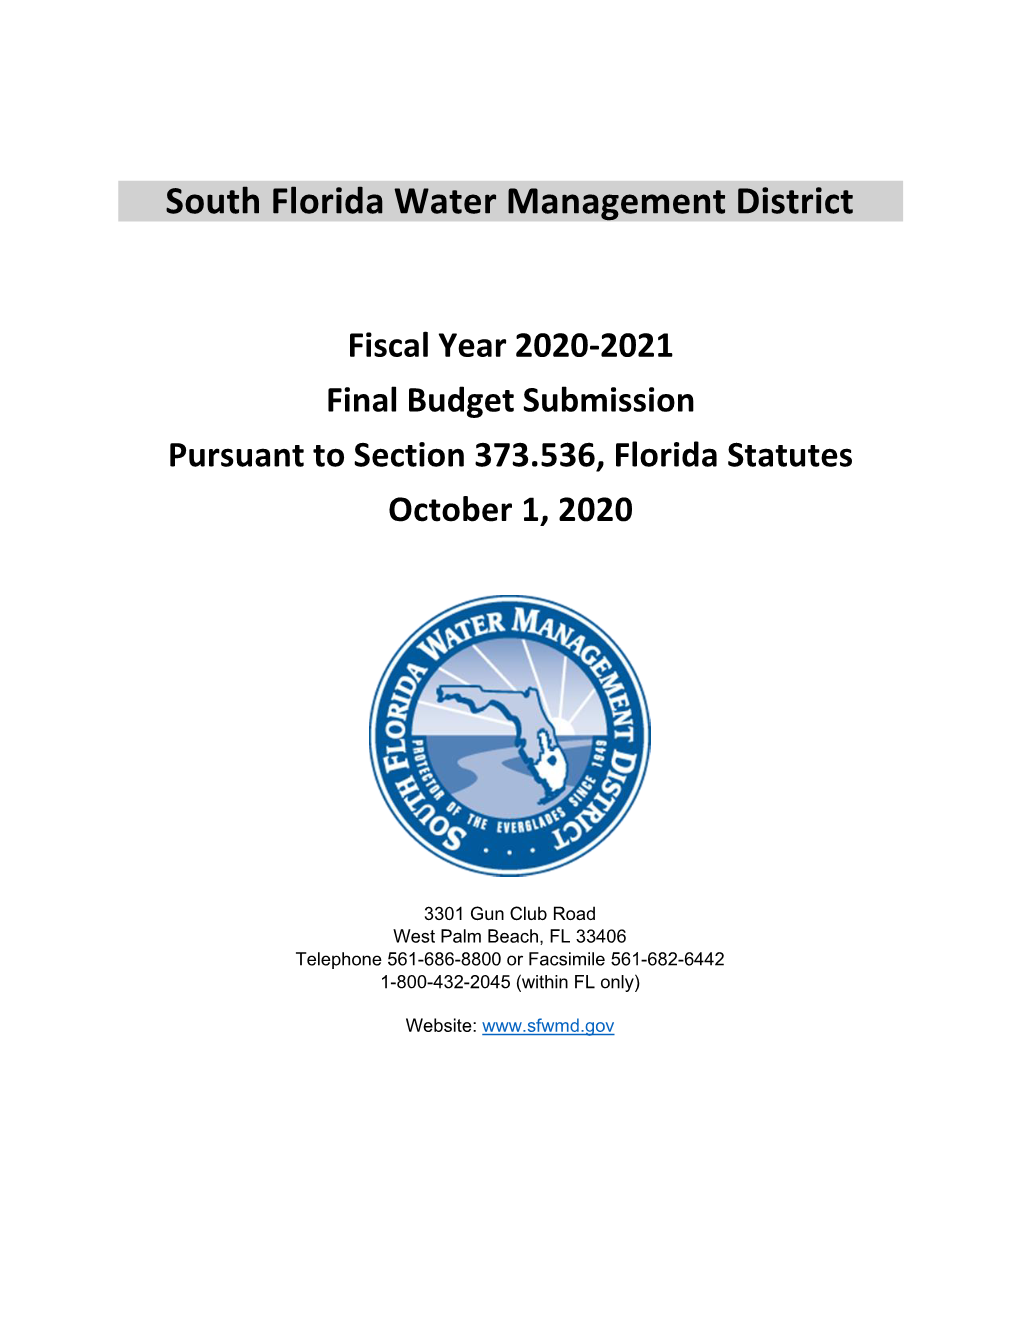 SFWMD Fiscal Year 2020-2021 Adopted Budget